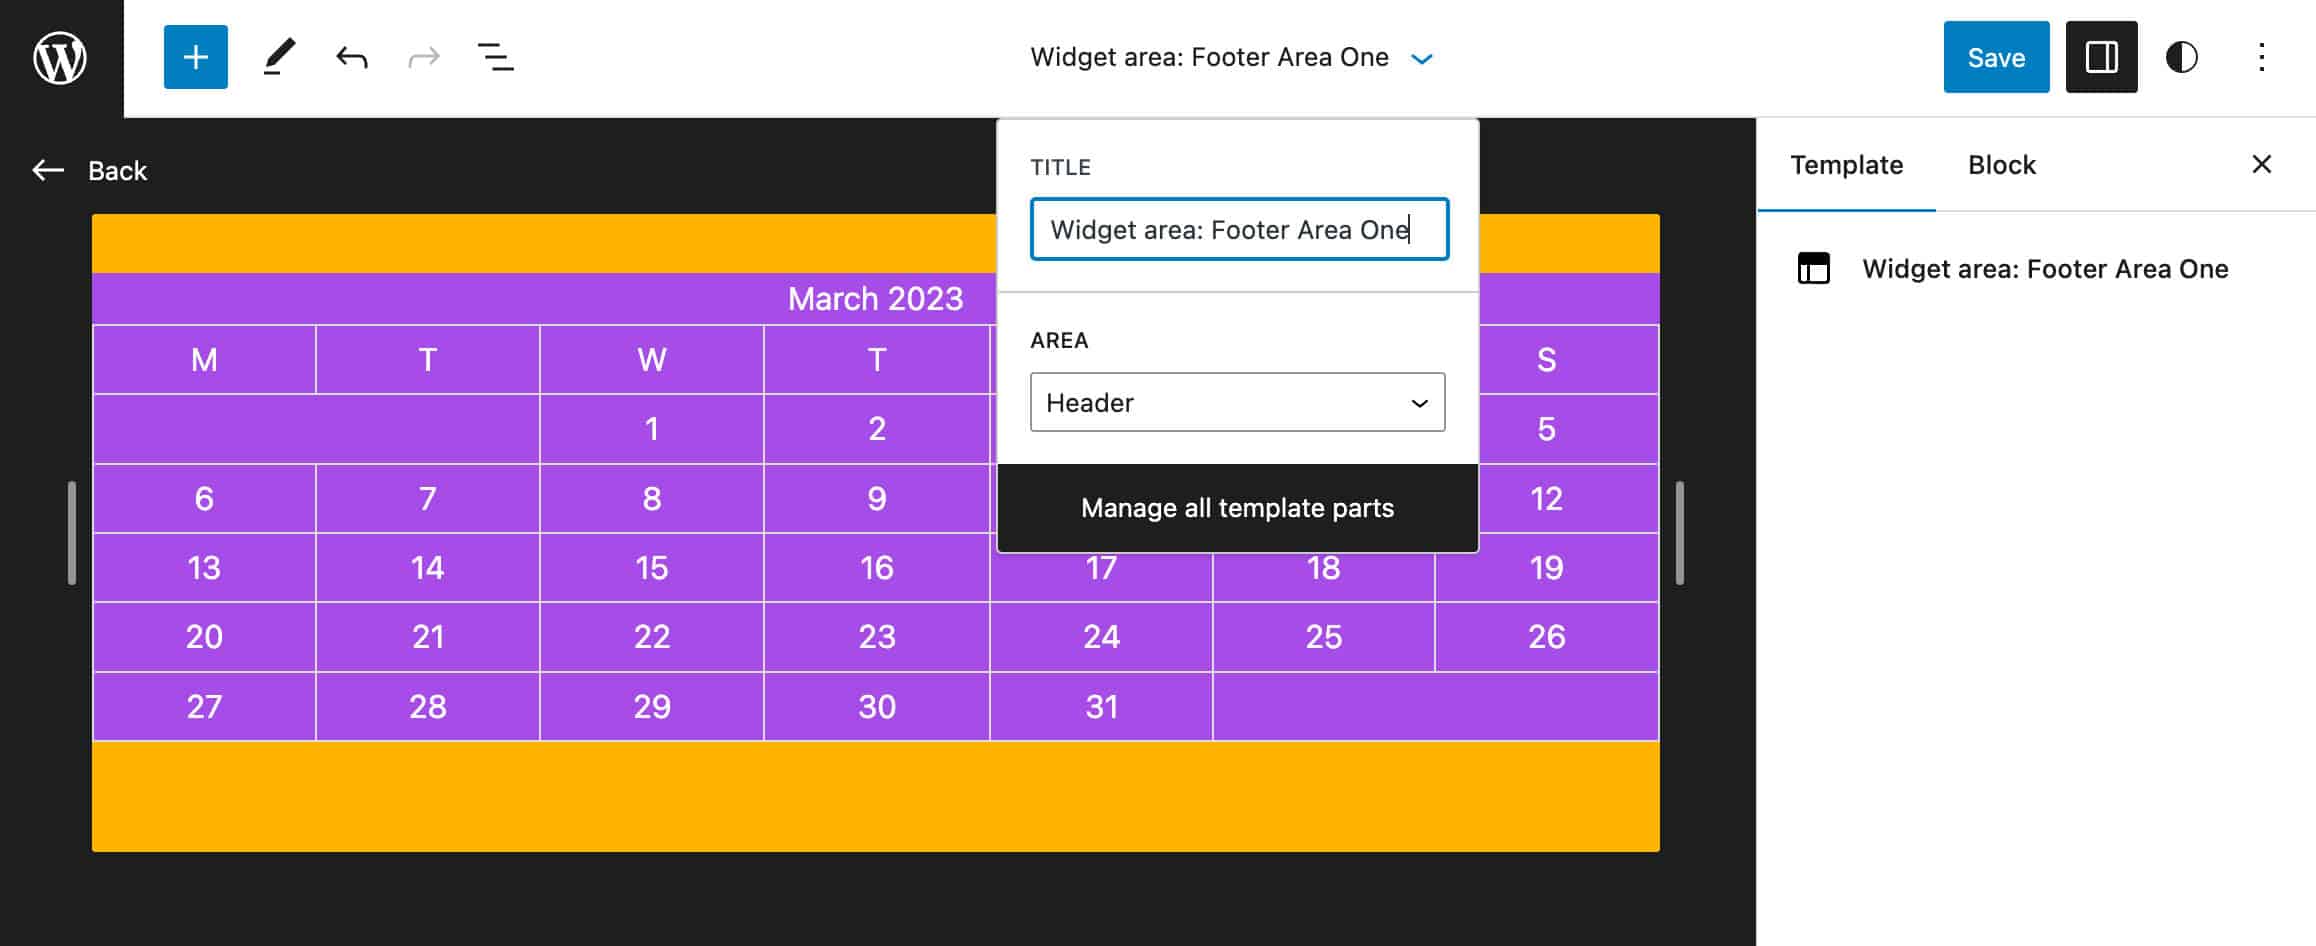 Previewing an imported widget area